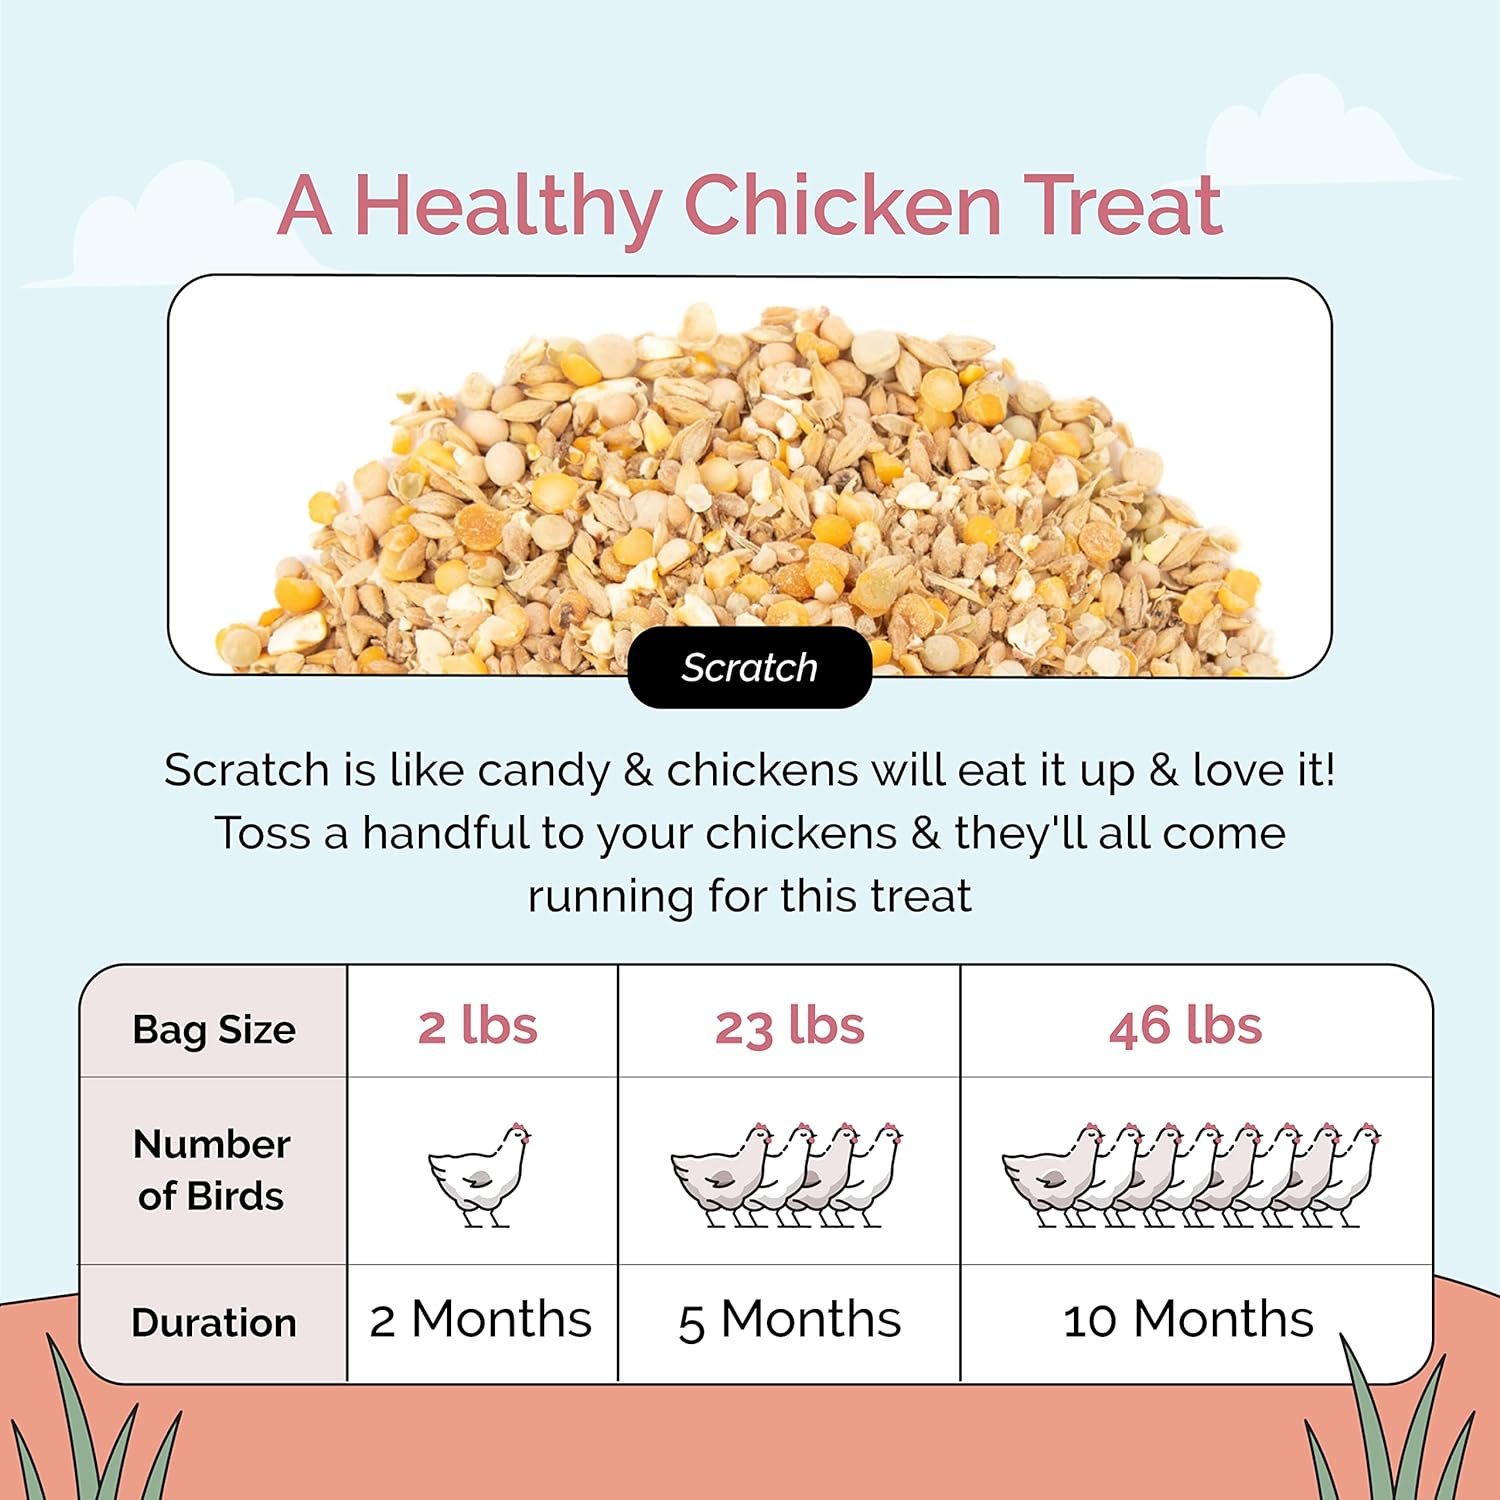 Mile Four | Chicken Scratch | Organic | Non-GMO, Soy-Free, Non-Medicated, Whole Grain Treat for Hens  Roosters | US Grown Grains | 11% Protein | 46 lbs.